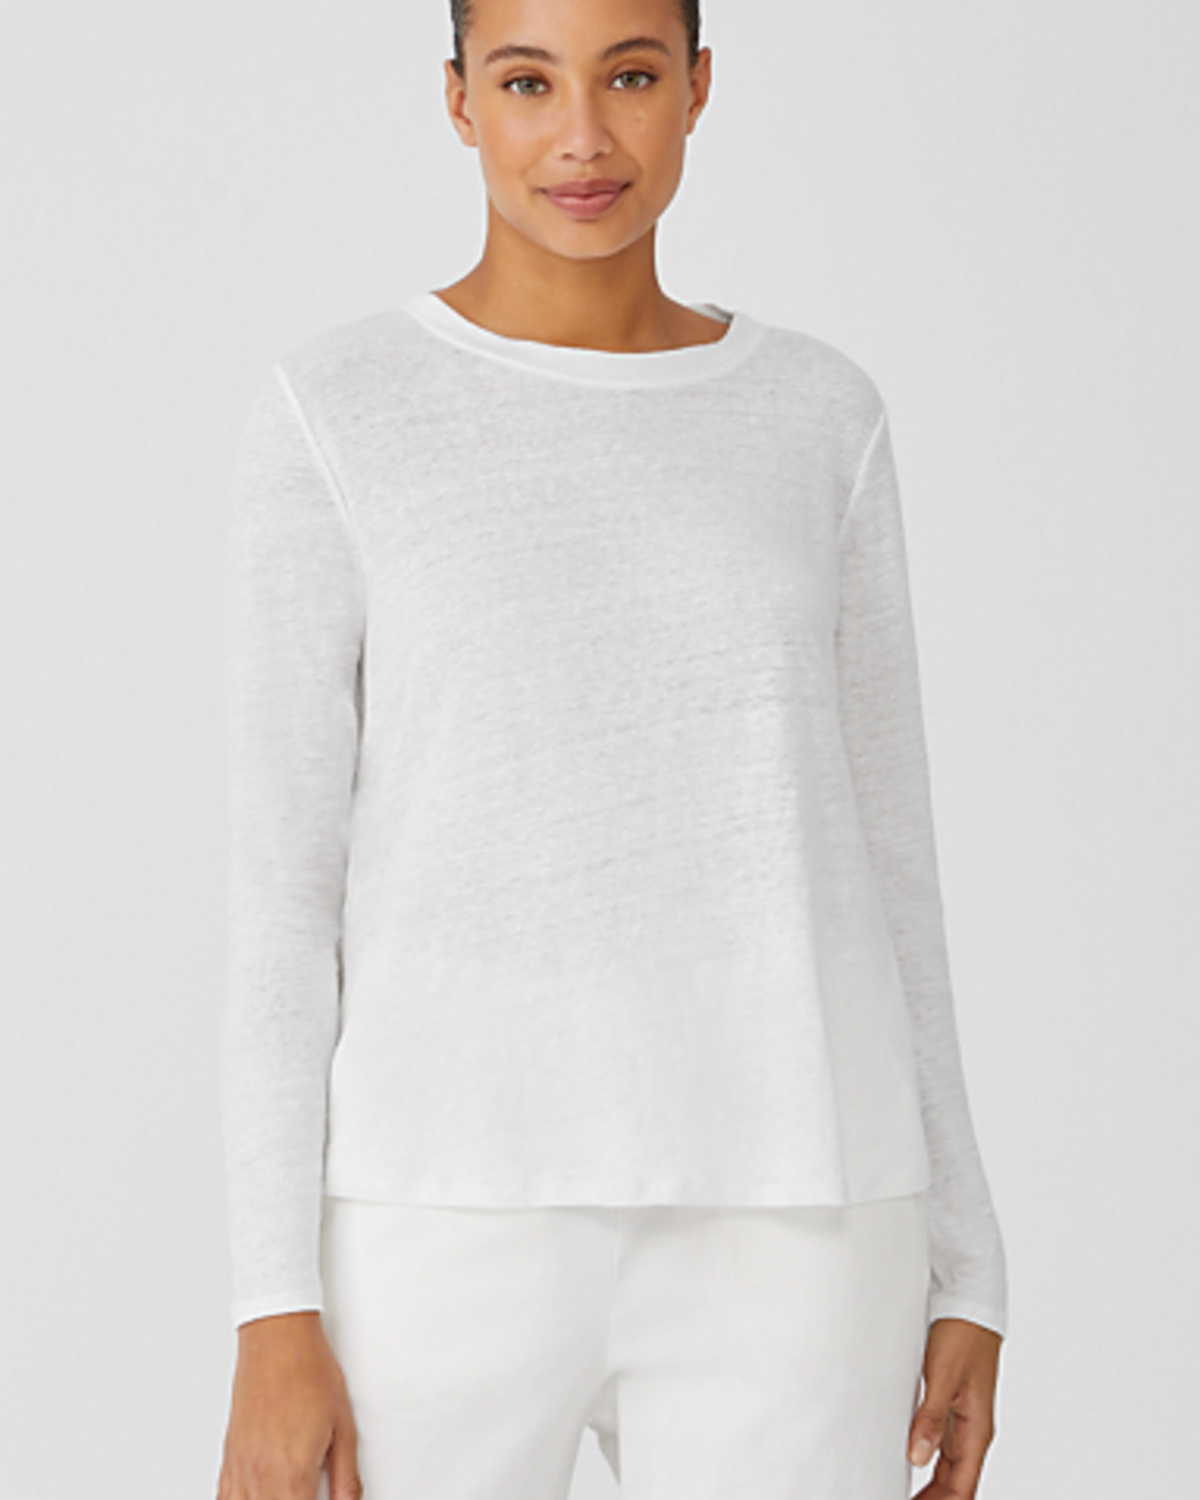 ORGANIC LINEN JERSEY CREW NECK TOP EASY FIT, BASIC LENGTH - AshleyCole Boutique